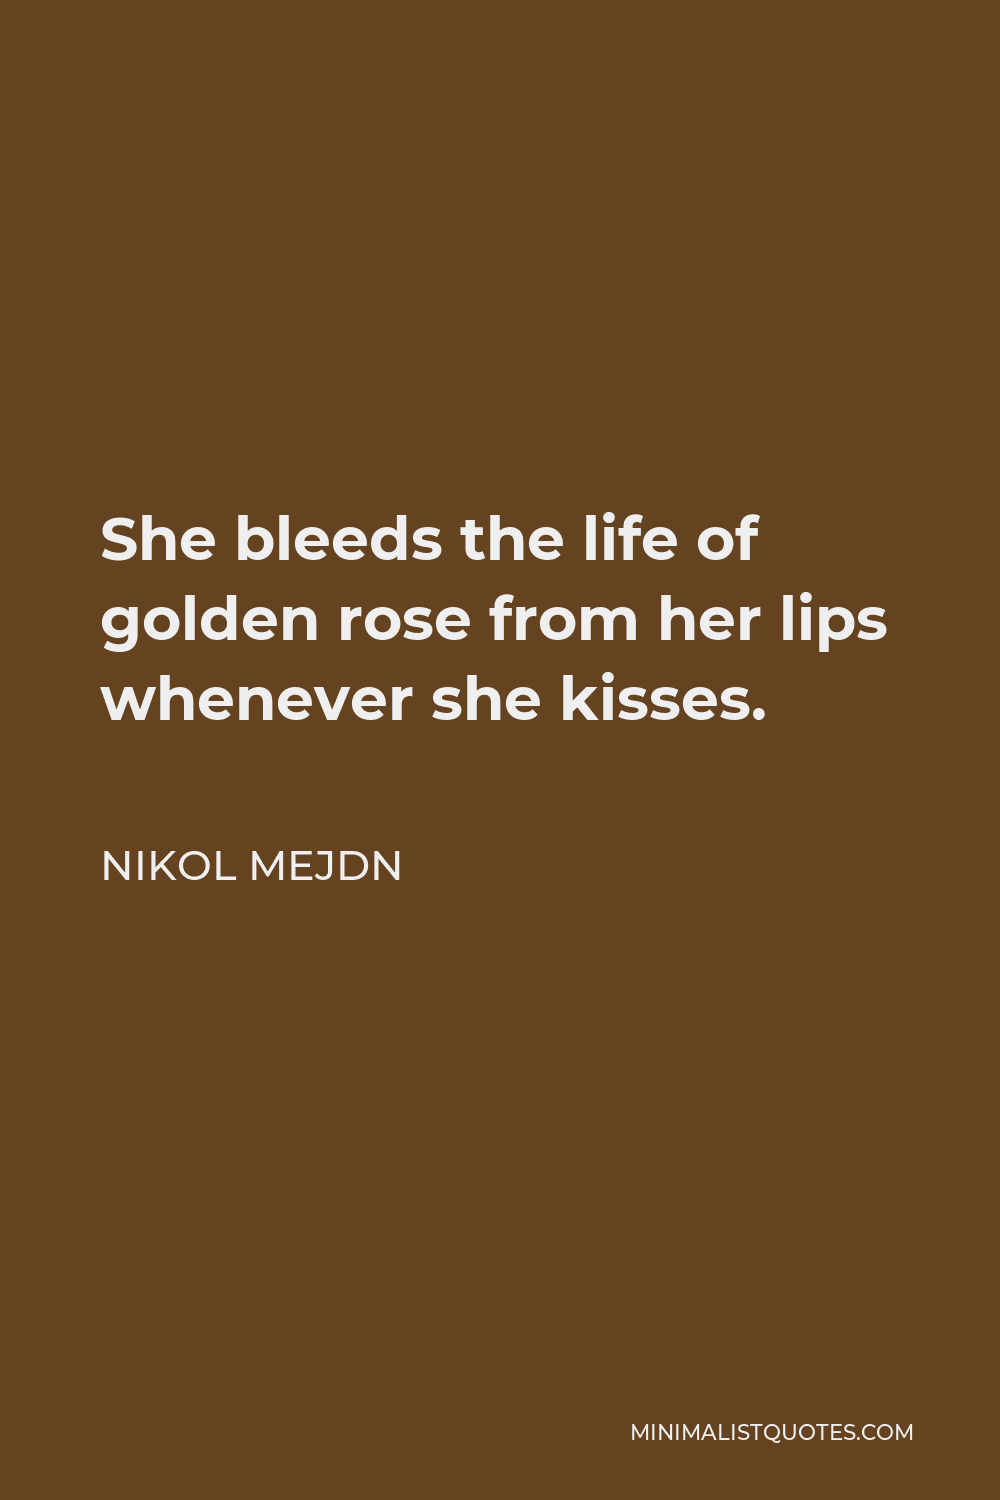 Nikol Mejdn Quote - She bleeds the life of golden rose from her lips whenever she kisses.